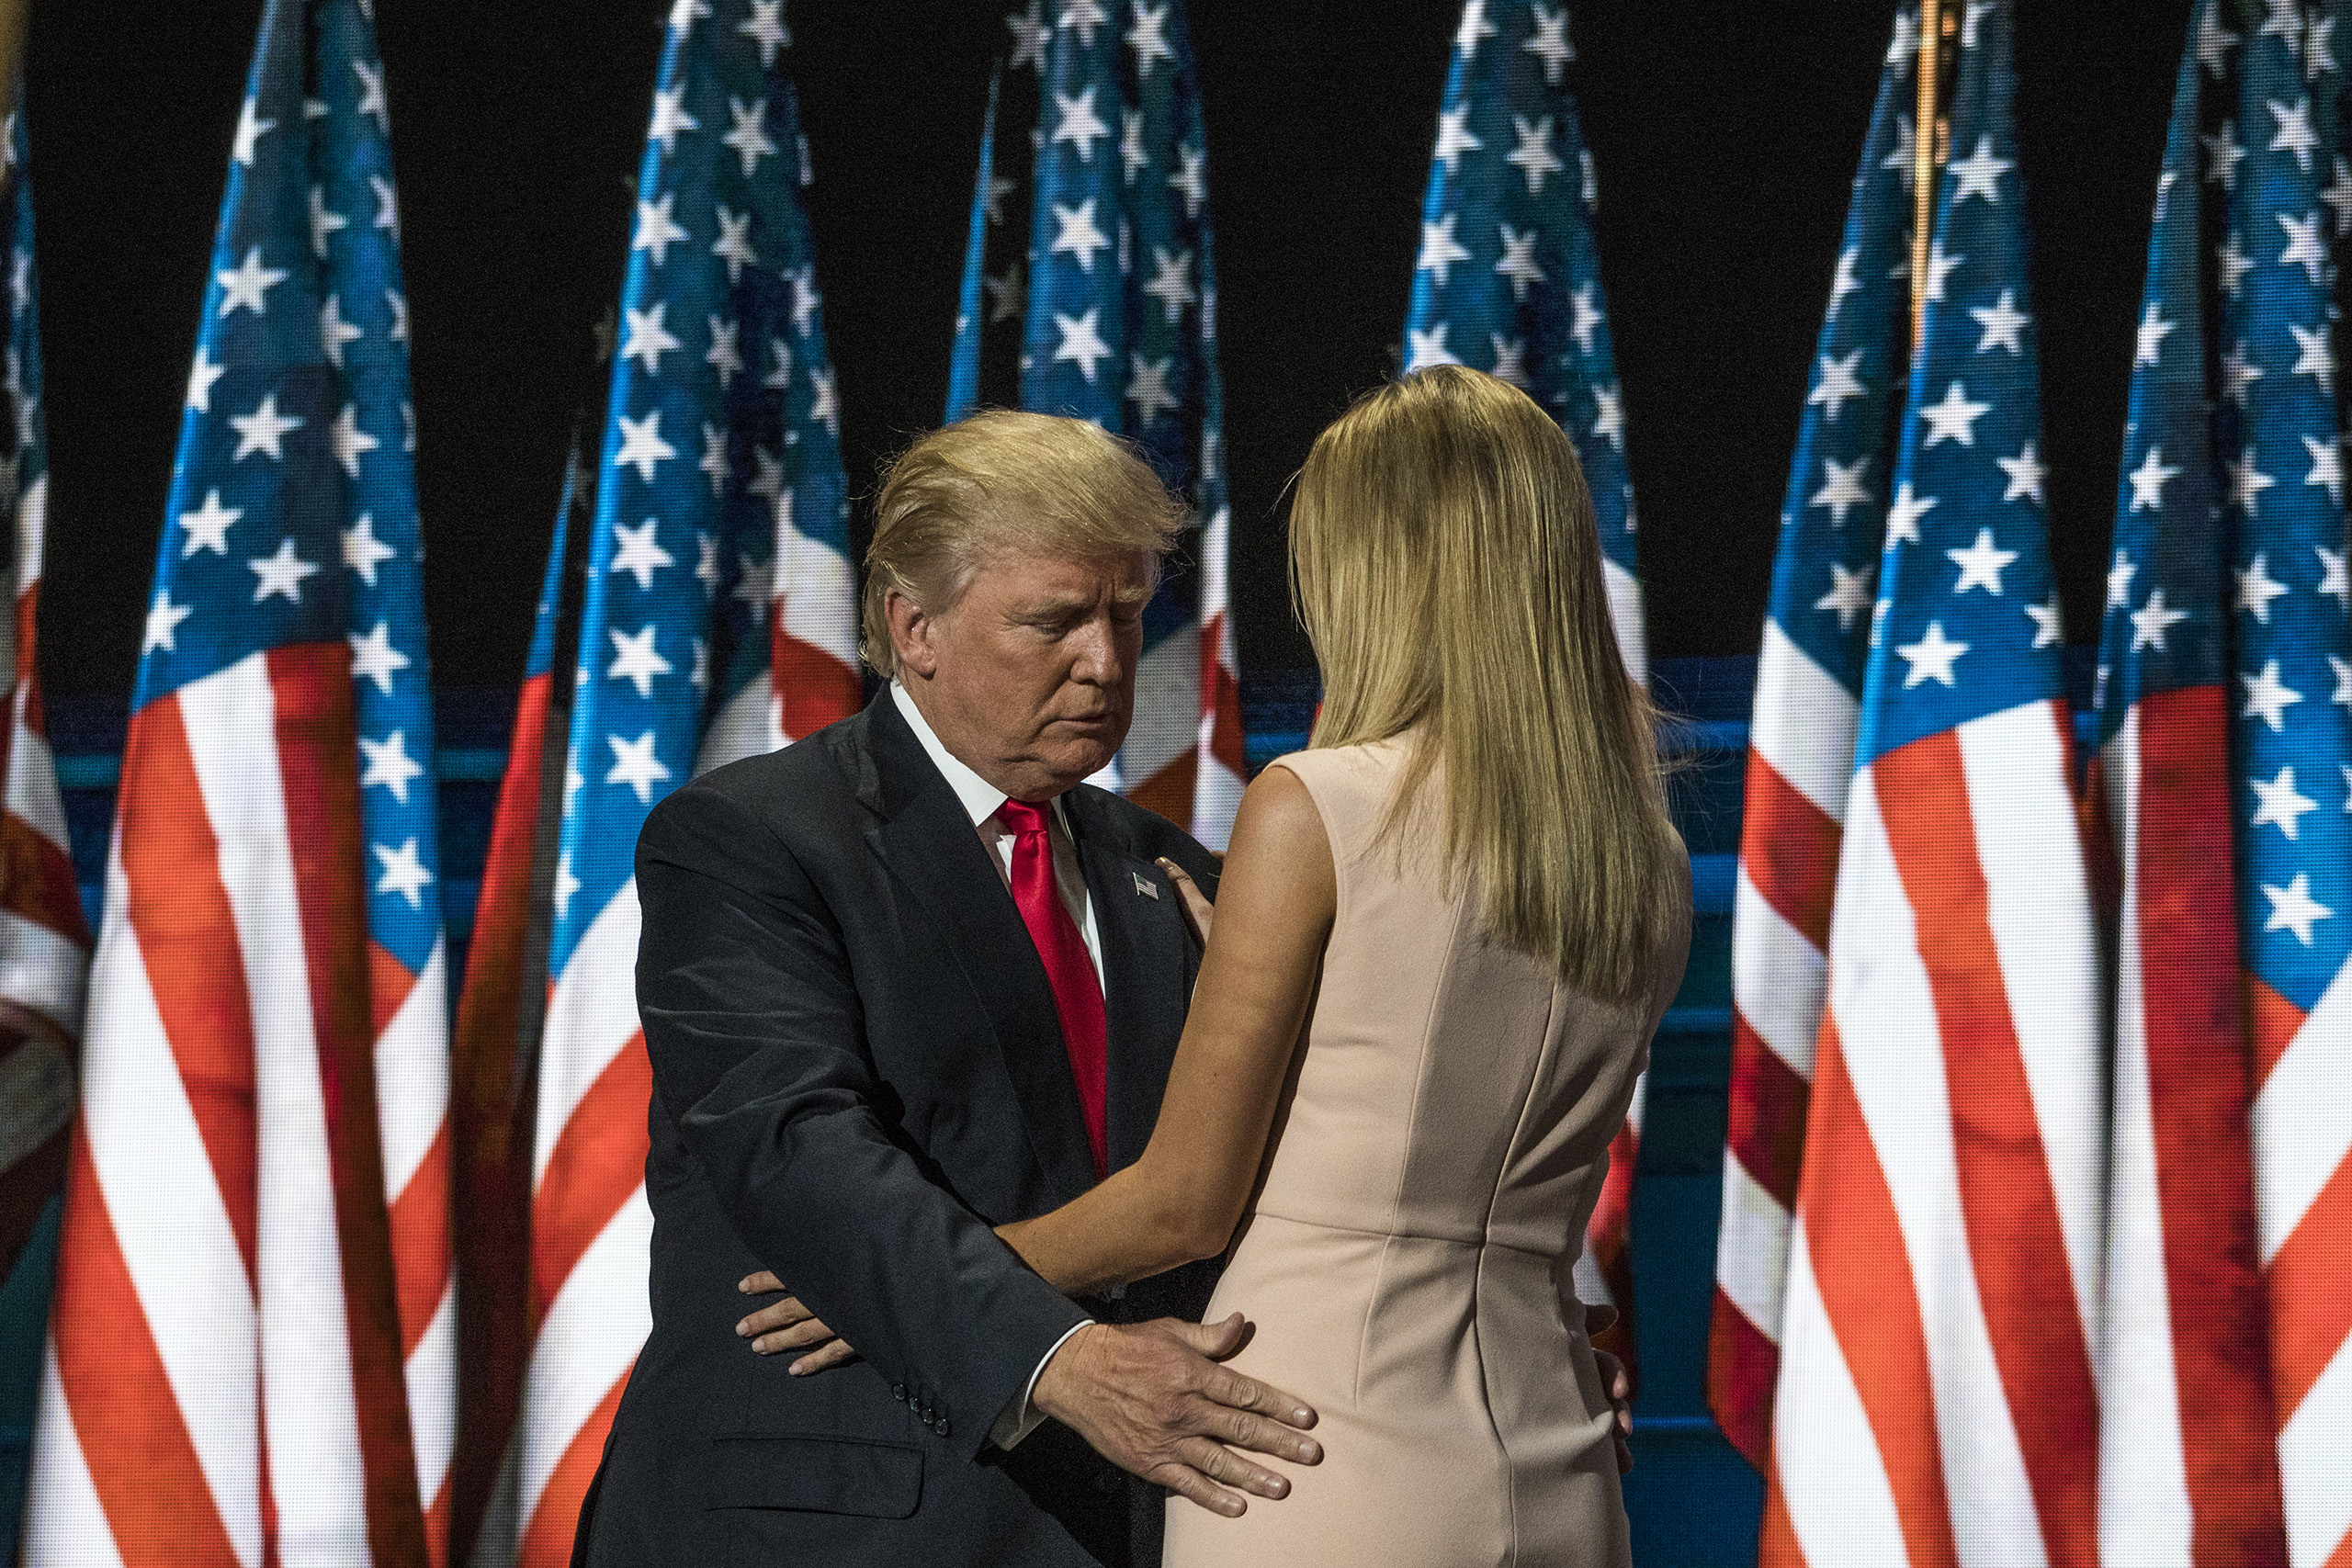 Republican presidential candidate Donald Trump walks on stage after his daughter, Ivanka Trump, introduced him on the fourth day of the Republican National Convention on July 21, 2016 at the Quicken Loans Arena in Cleveland, Ohio.